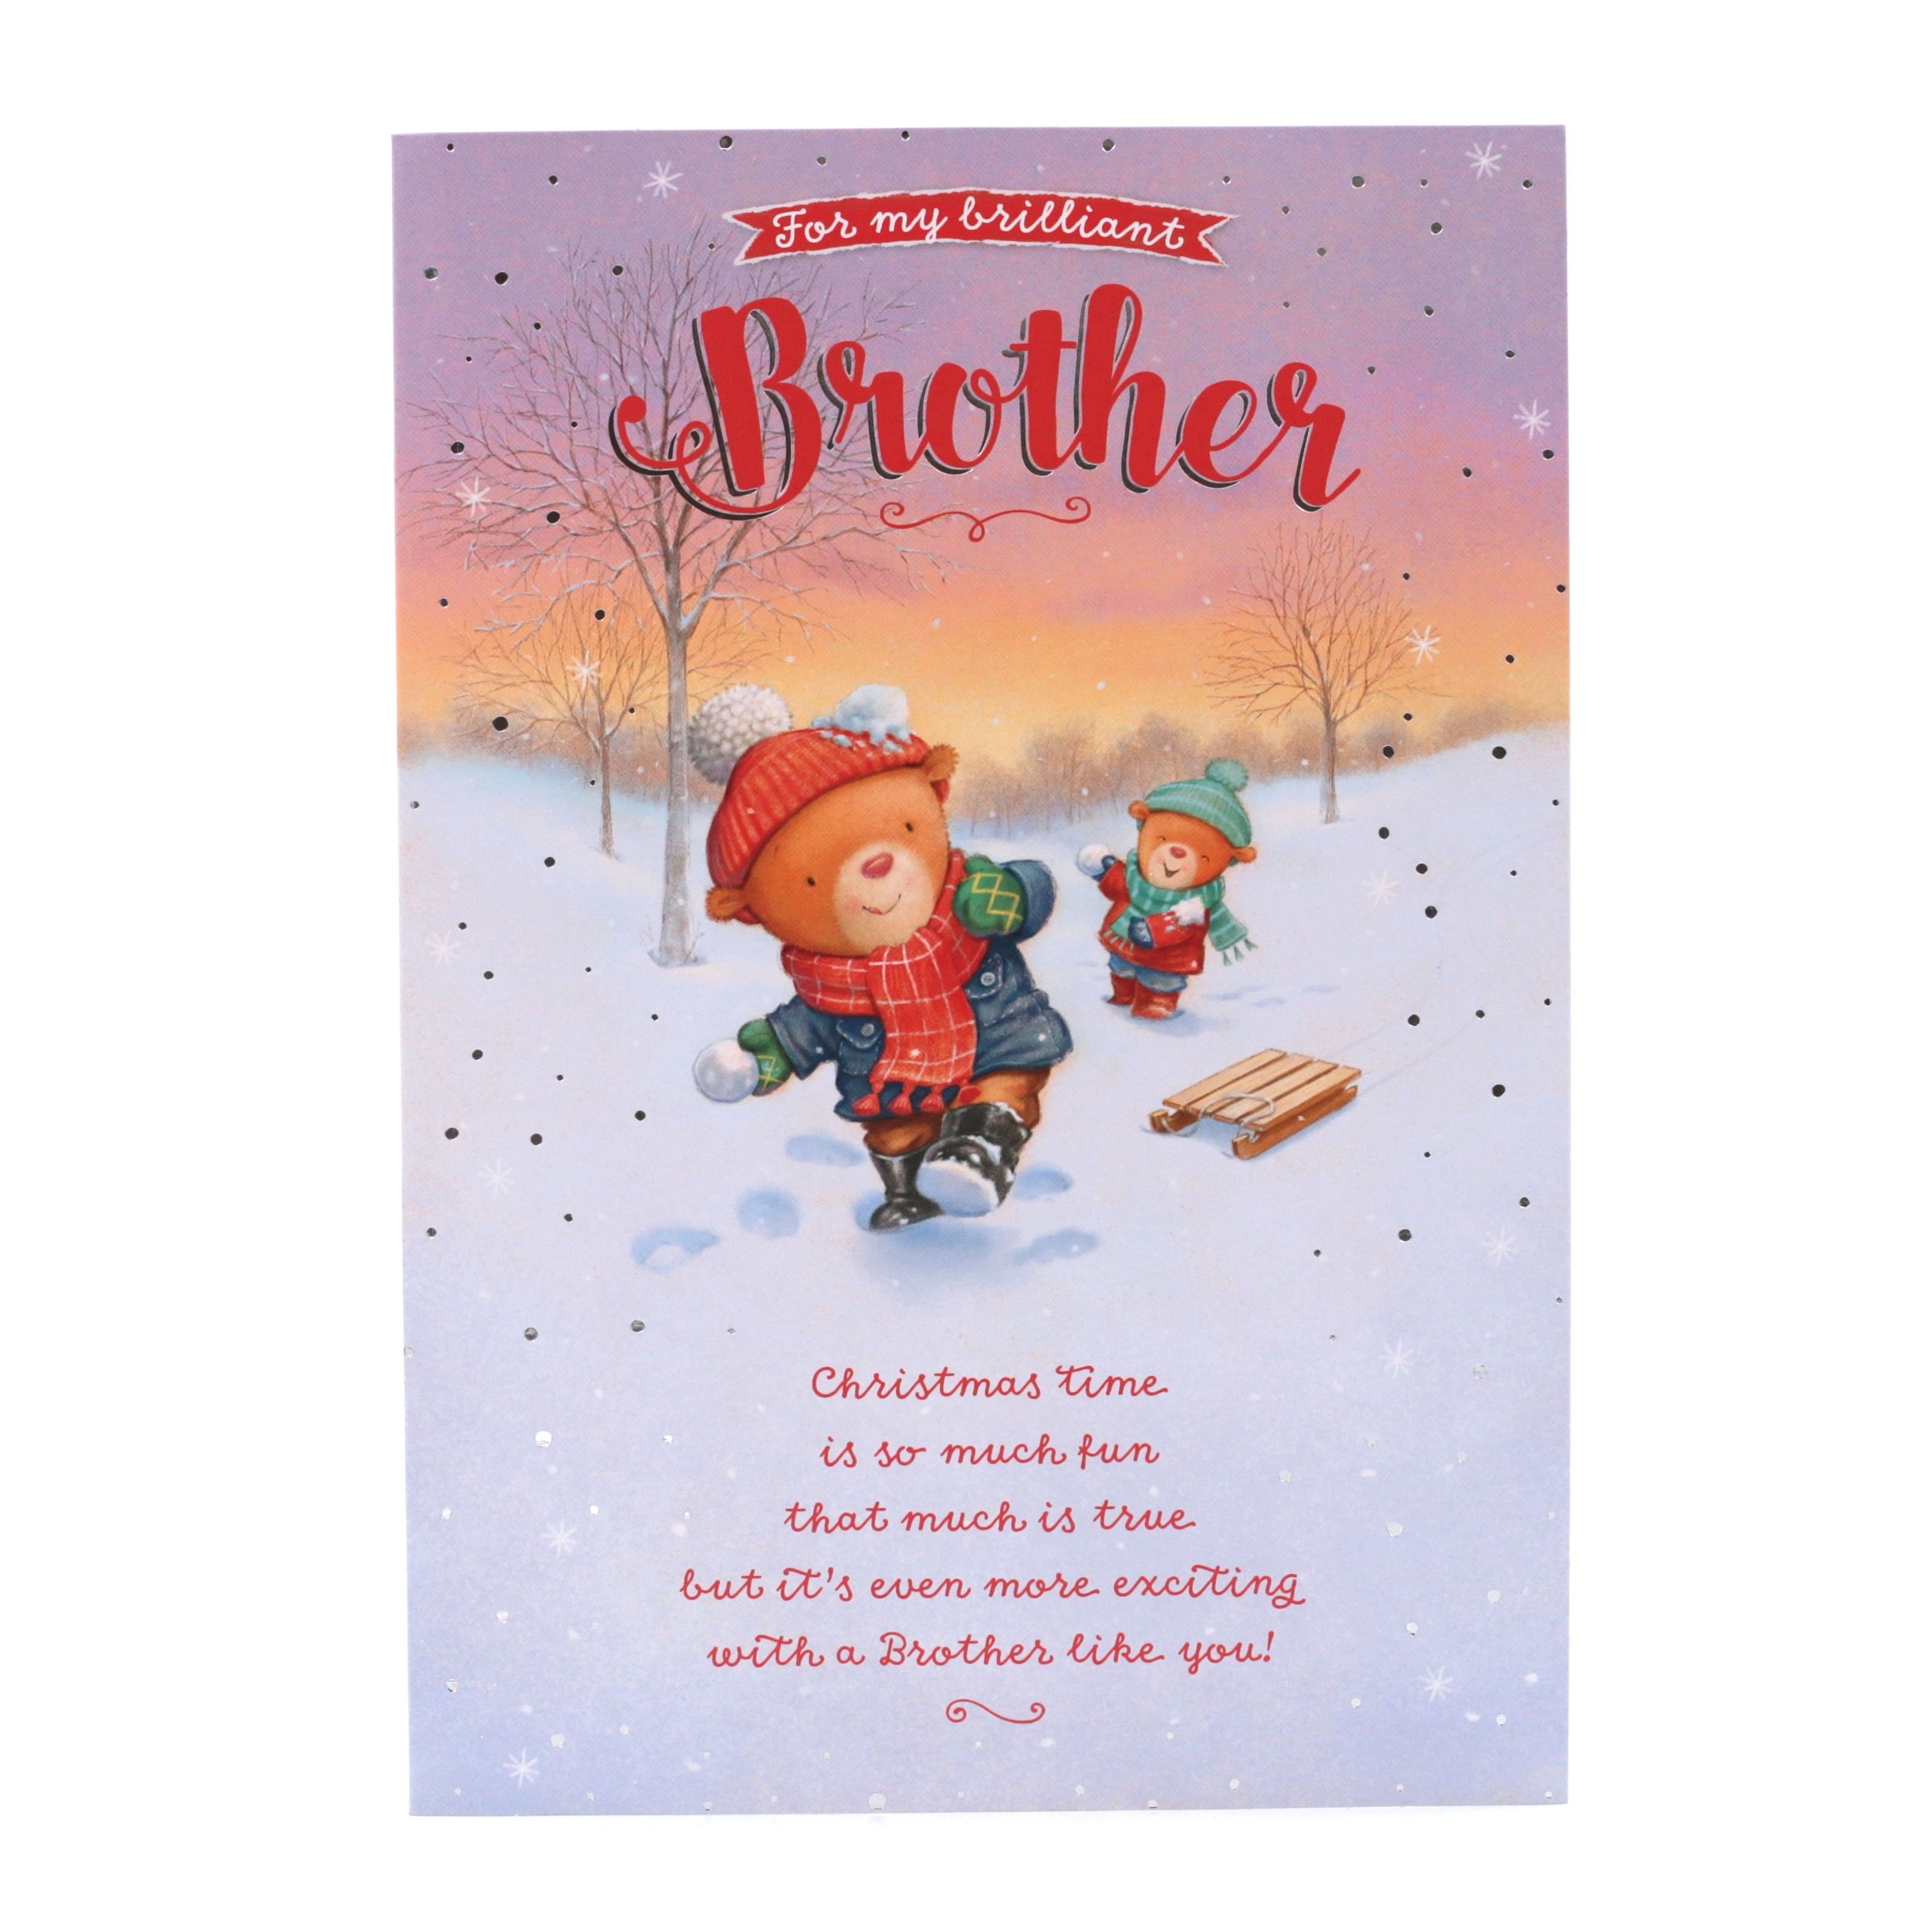 Christmas Card - Brilliant Brother, Cute Bears In The Snow